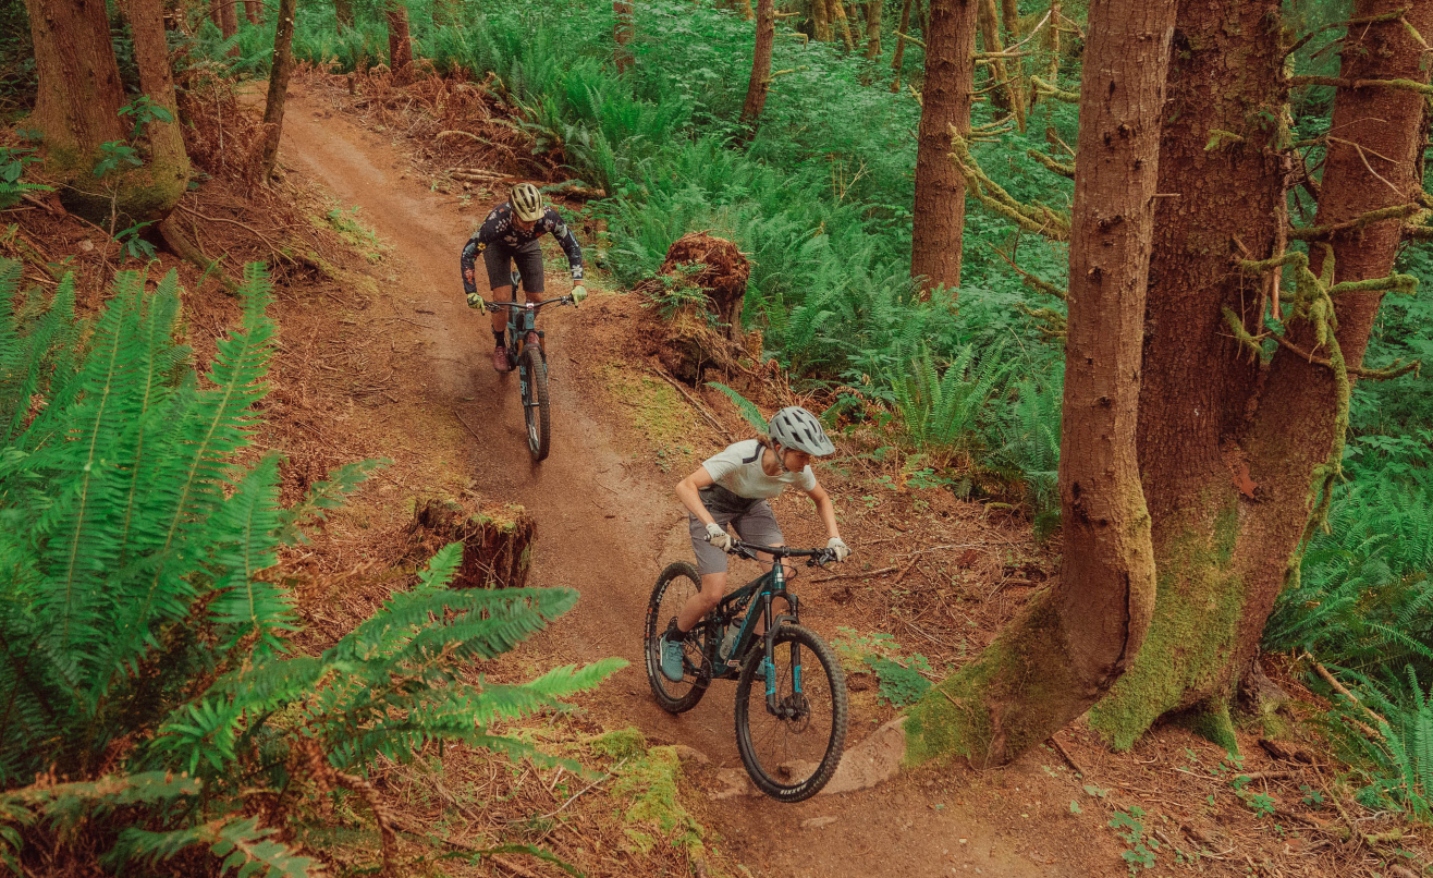 two bike riders ride down dirt trail in forest